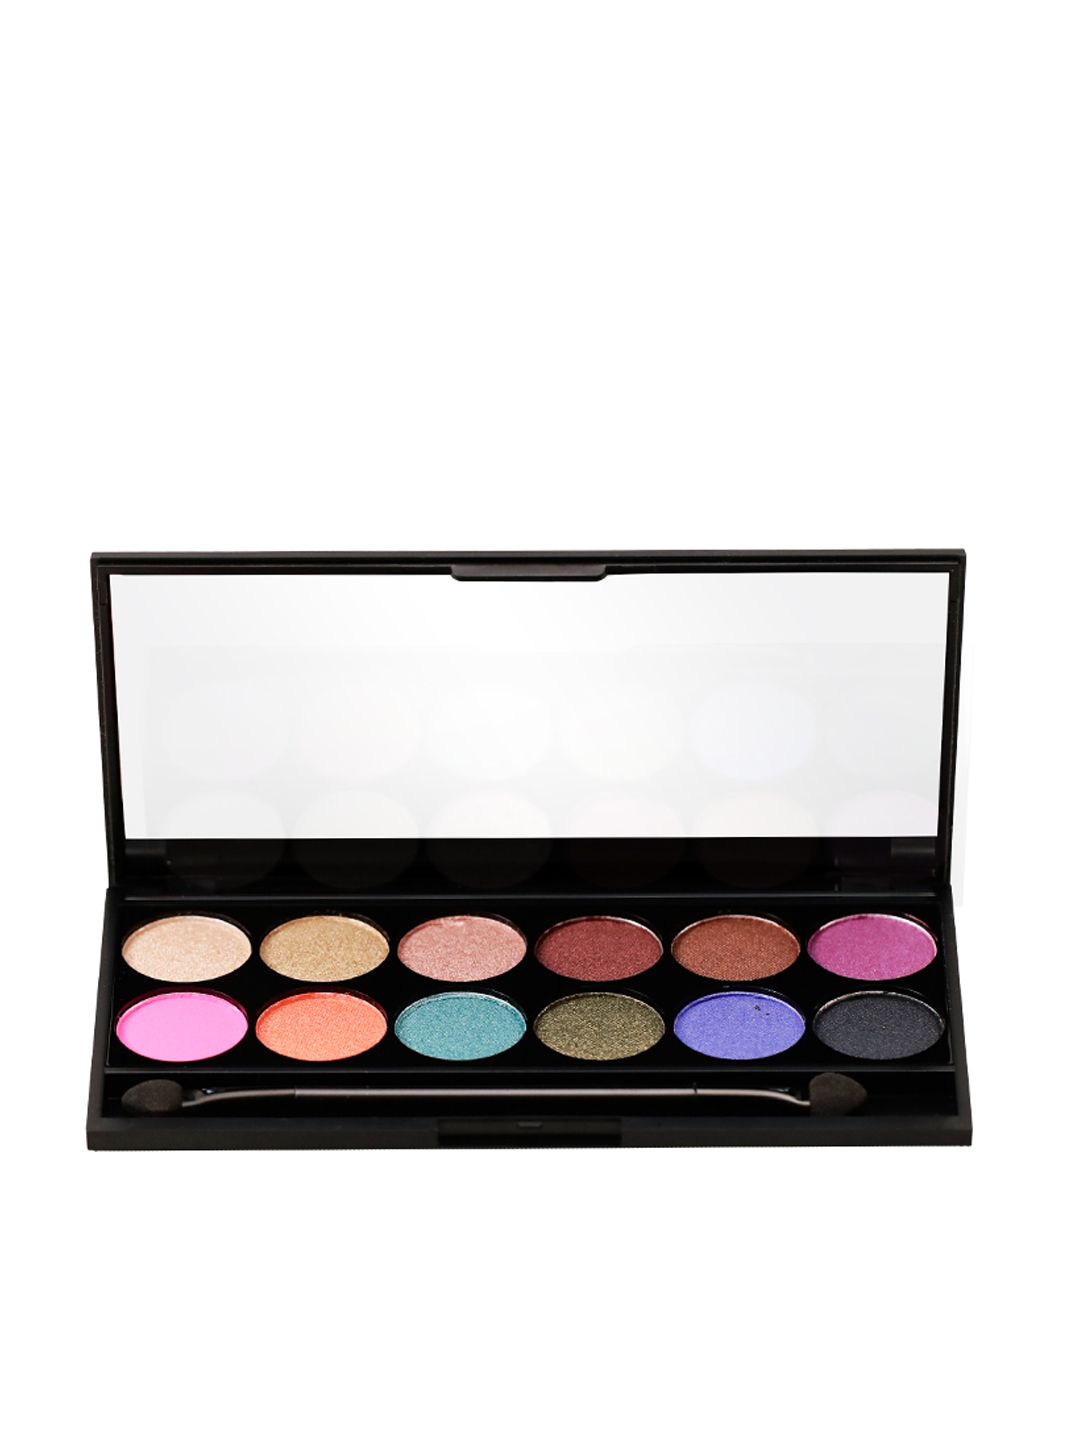 SWISS BEAUTY 12 Color Ultra Professional Eyeshadows 12 gm - Shade 5 Price in India